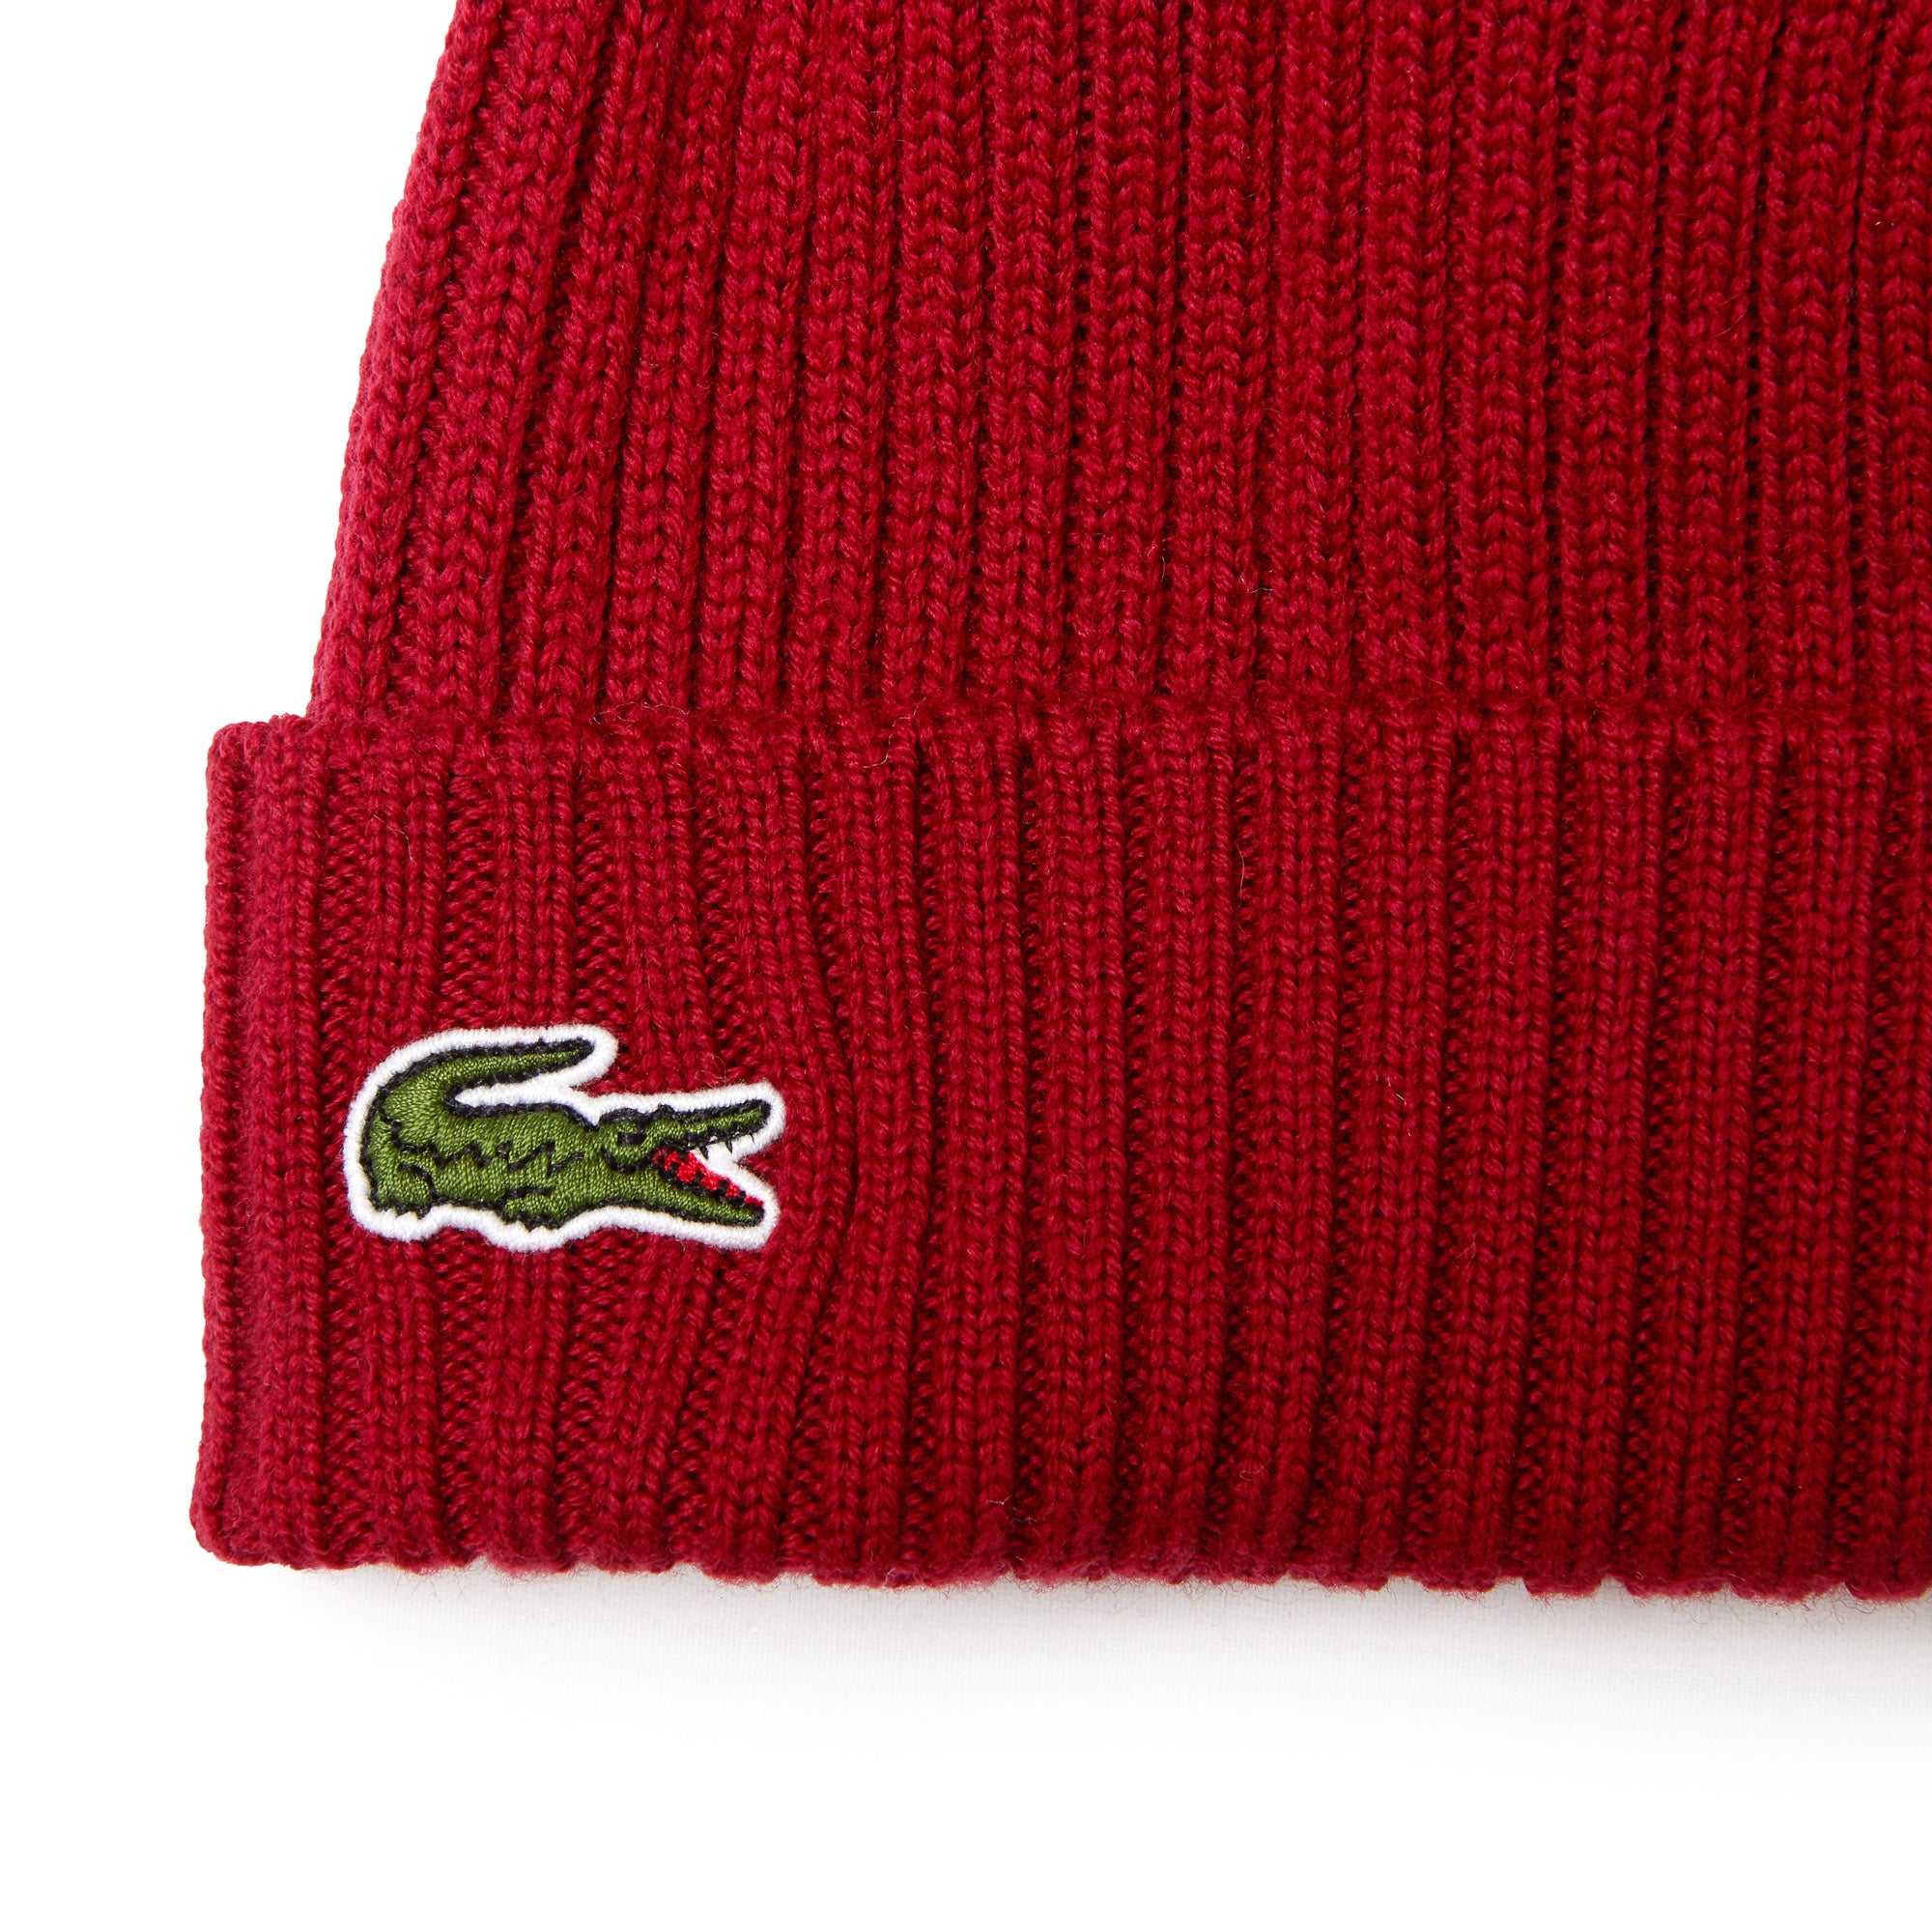 lacoste-ribbed-wool-beanie-hat-rb0001-bordeaux-476